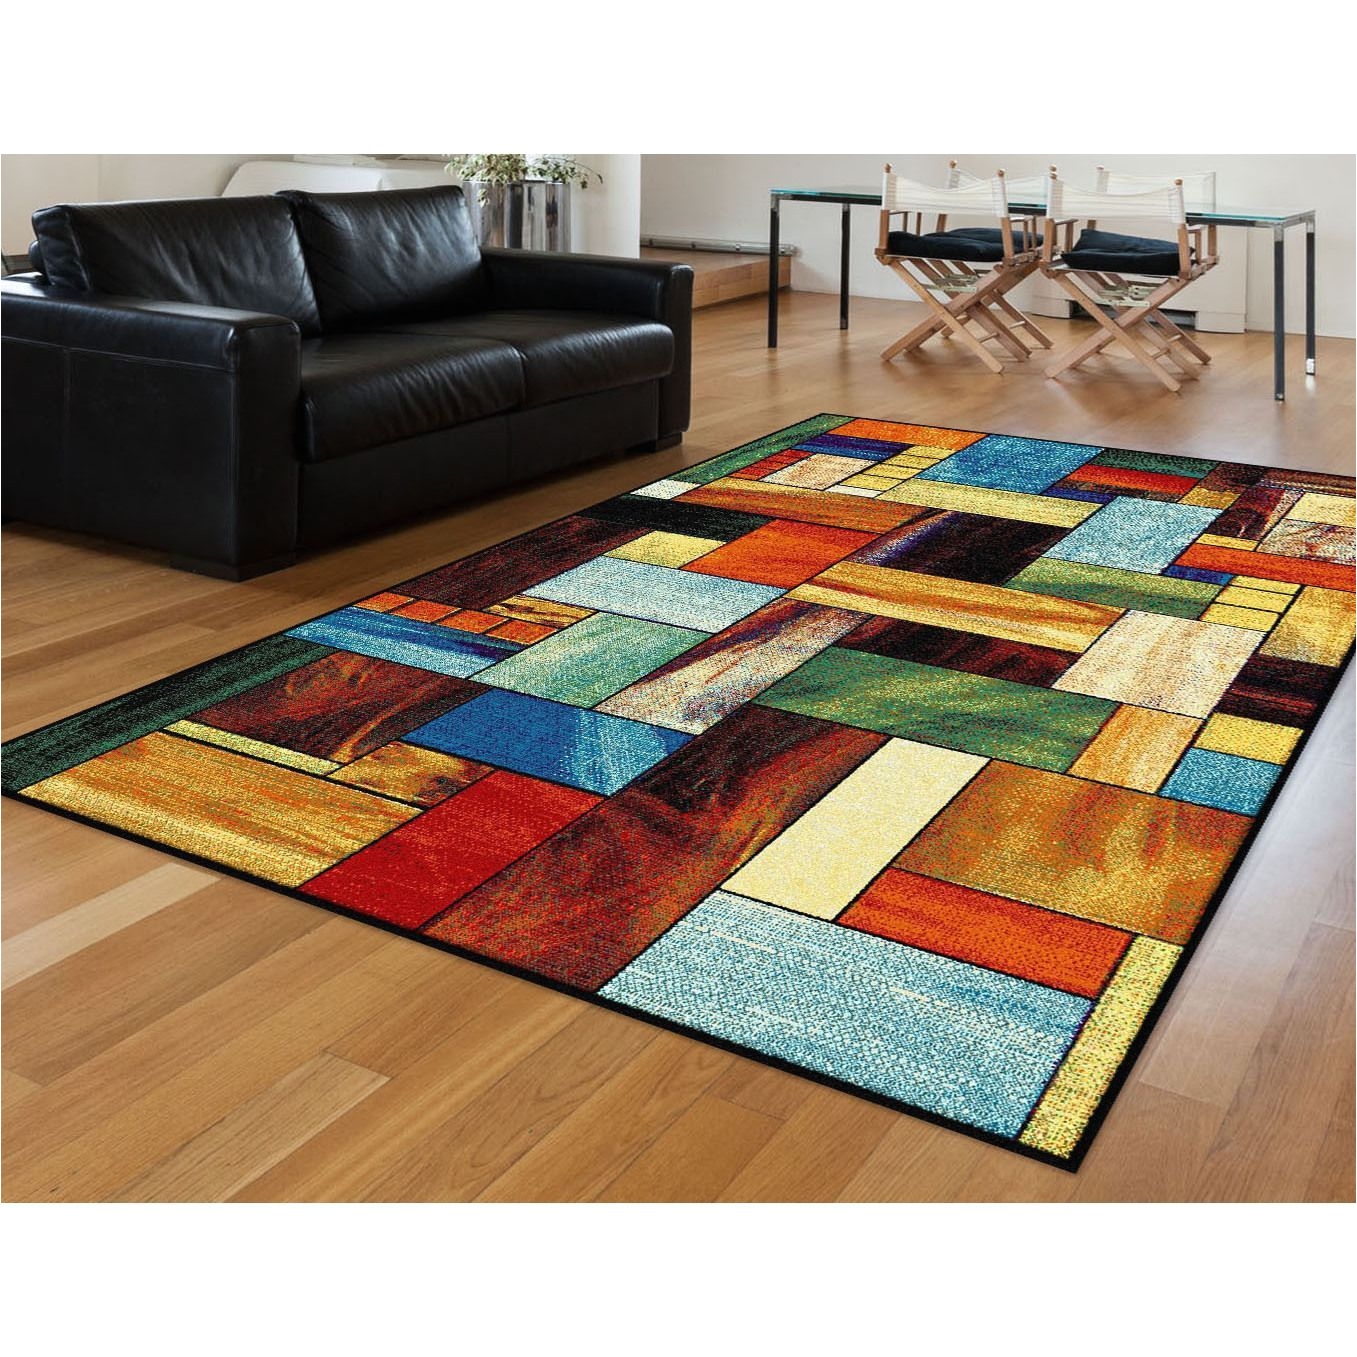 adore your decor with this colorful contemporary area rug that evokes the idea of stained glass the earnest abstract arrangement combines hues to form an